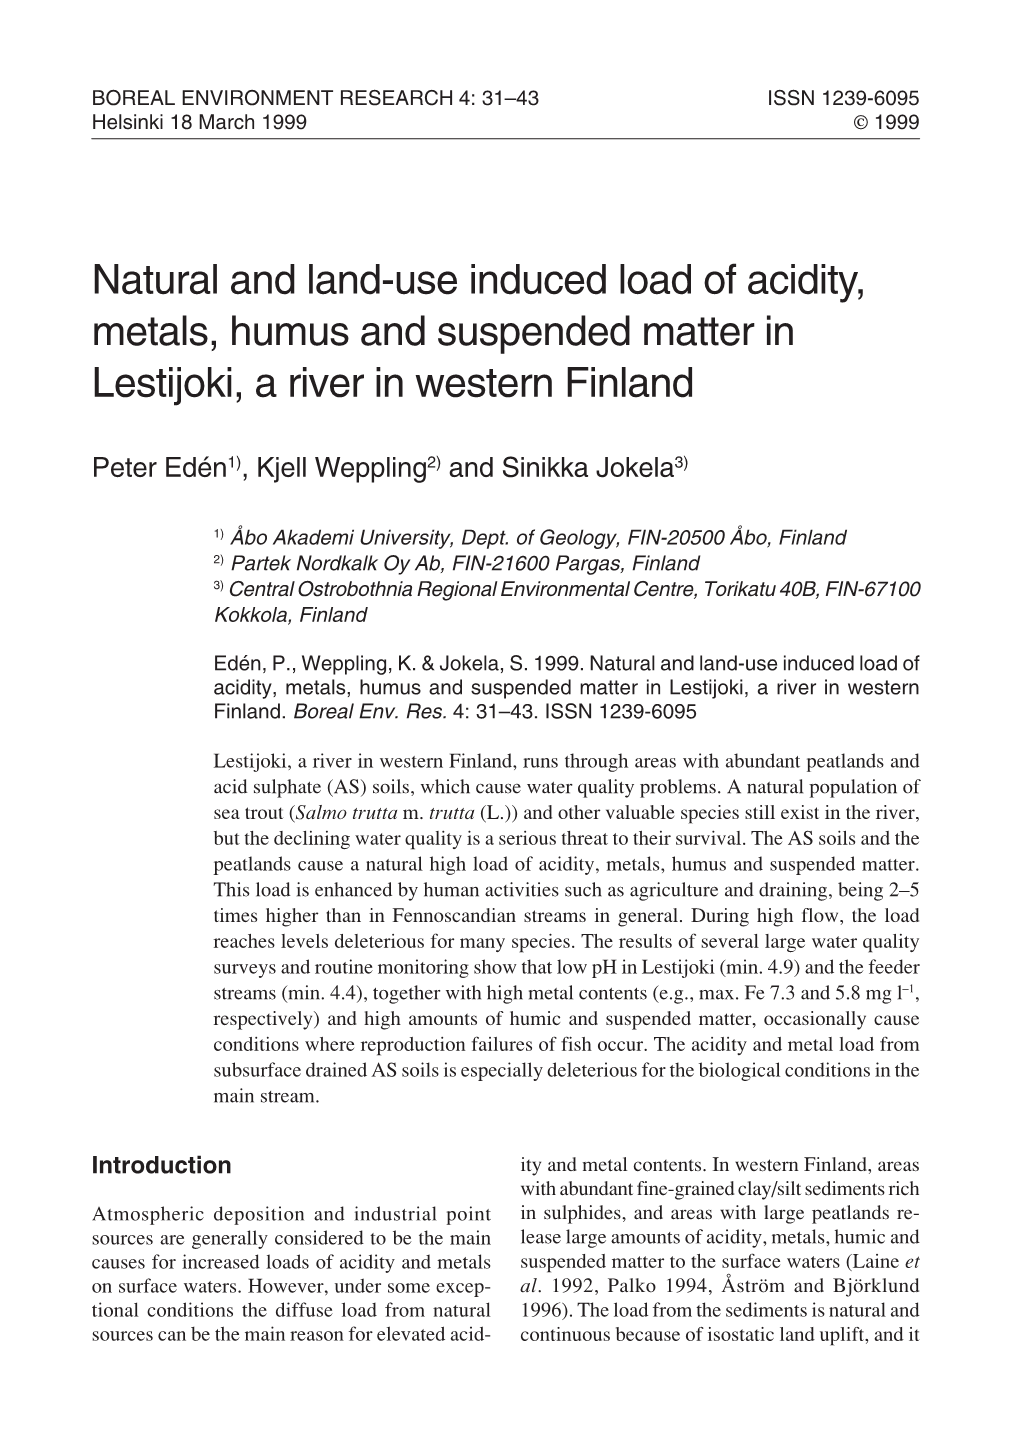 Natural and Land-Use Induced Load of Acidity, Metals, Humus and Suspended Matter in Lestijoki, a River in Western Finland